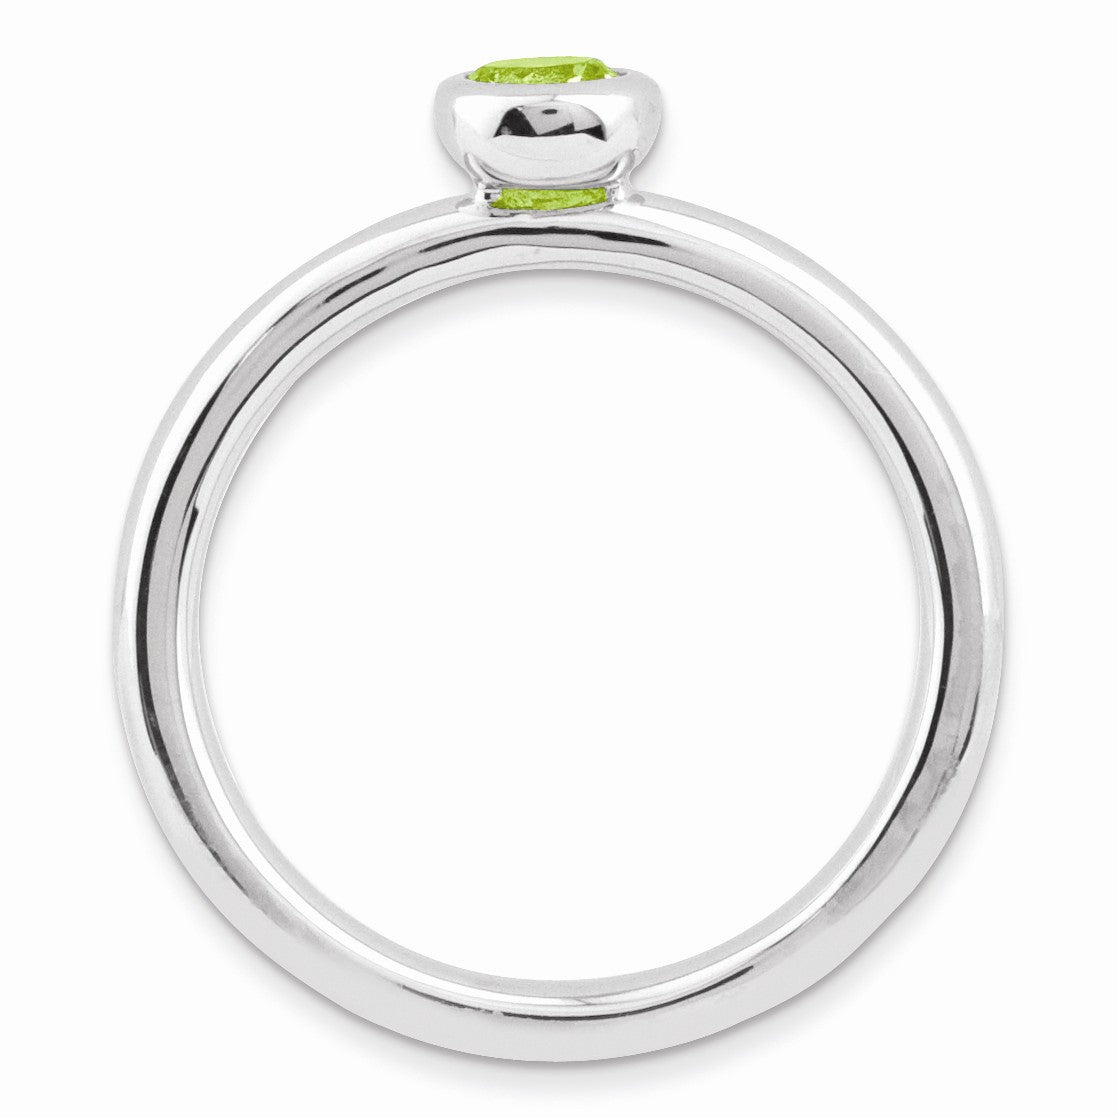 Alternate view of the Stackable Low Profile 4mm Peridot Silver Ring by The Black Bow Jewelry Co.